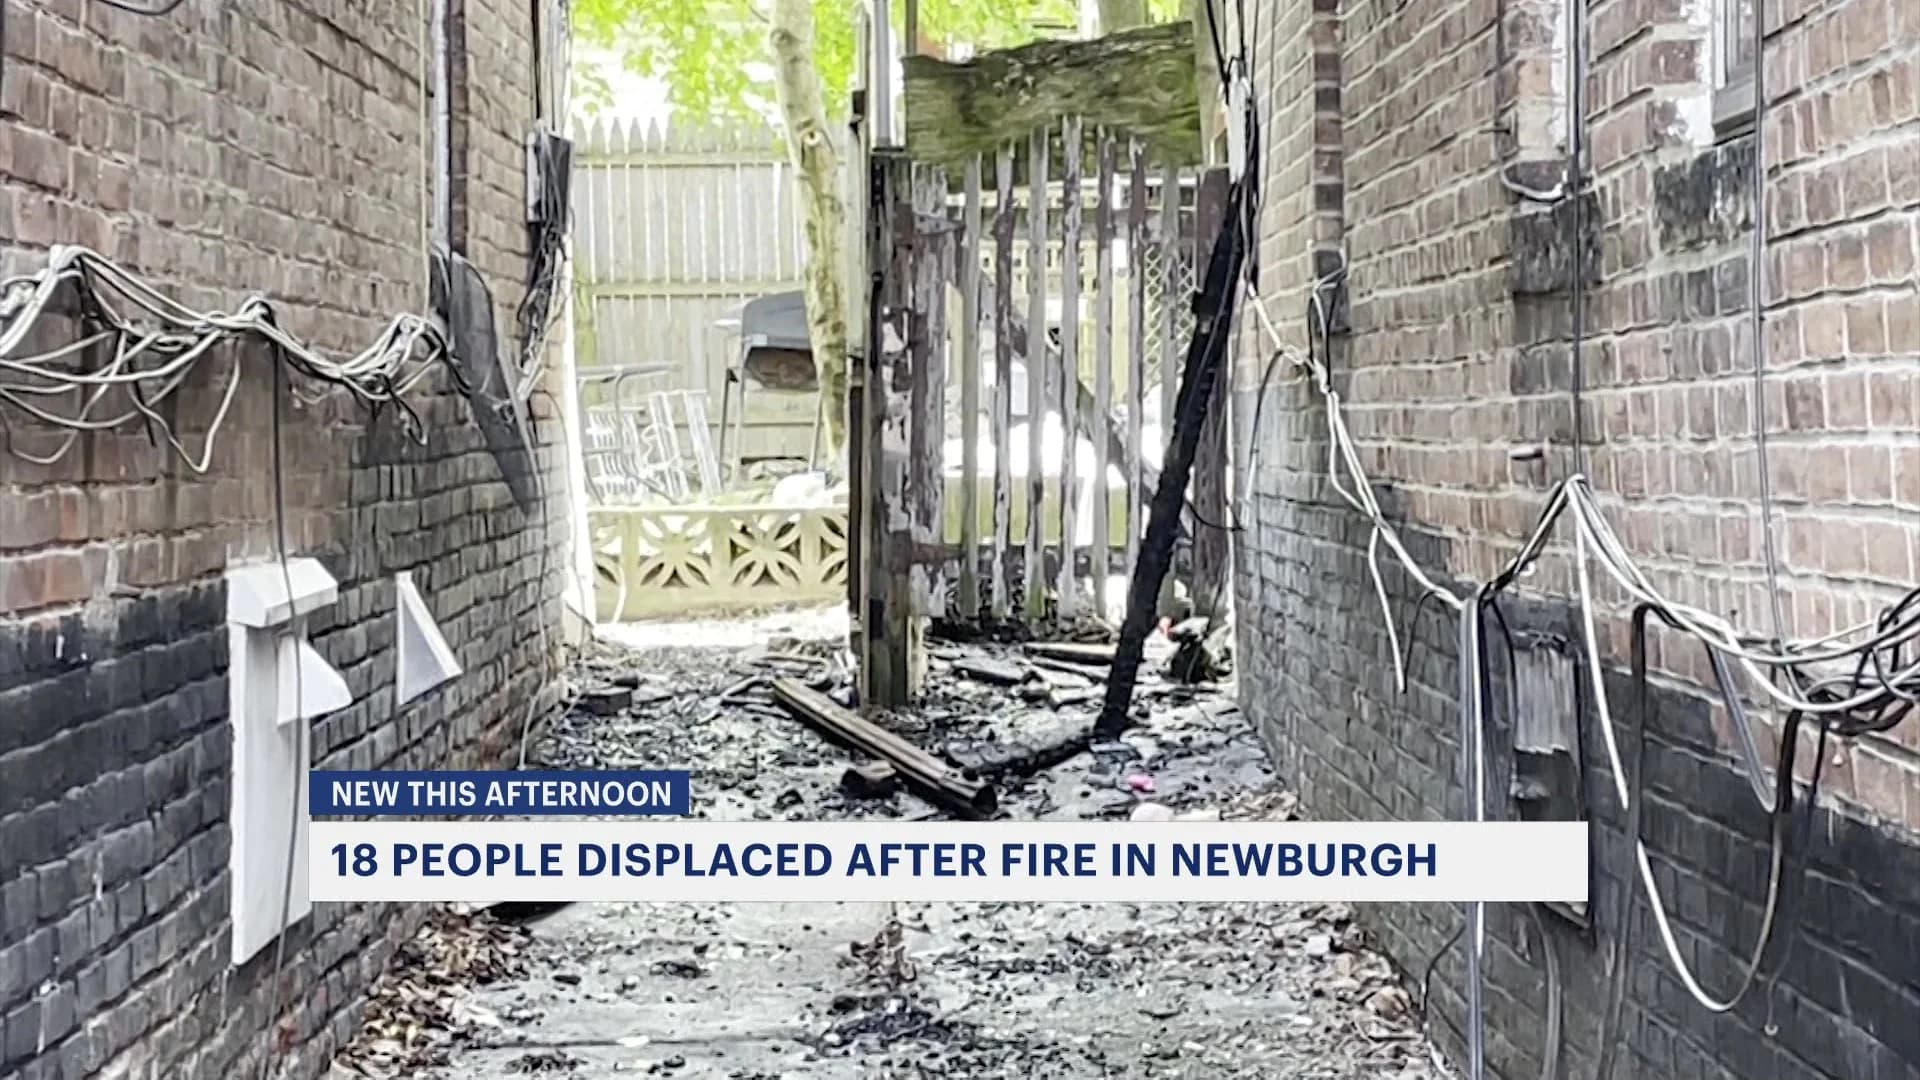 Authorities: Newburgh fire displaces 18 residents, including 6 children